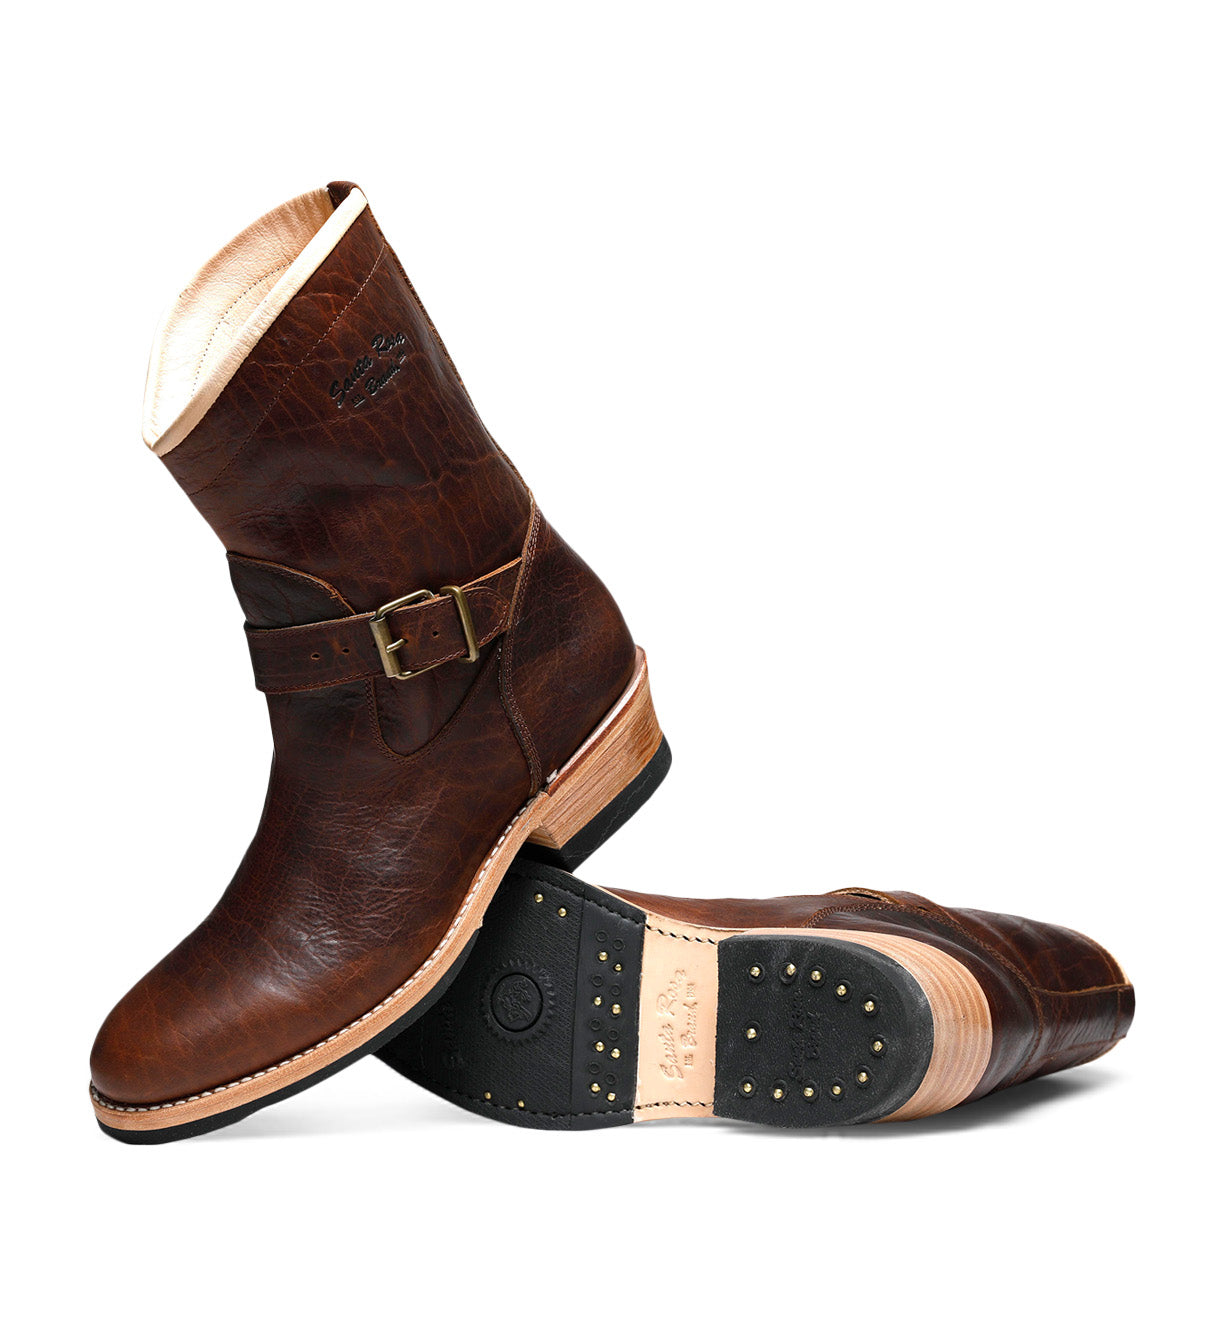 A pair of Santa Rosa Brand Carson Harness Boots with decorative stitching and a buckle, isolated on a white background.